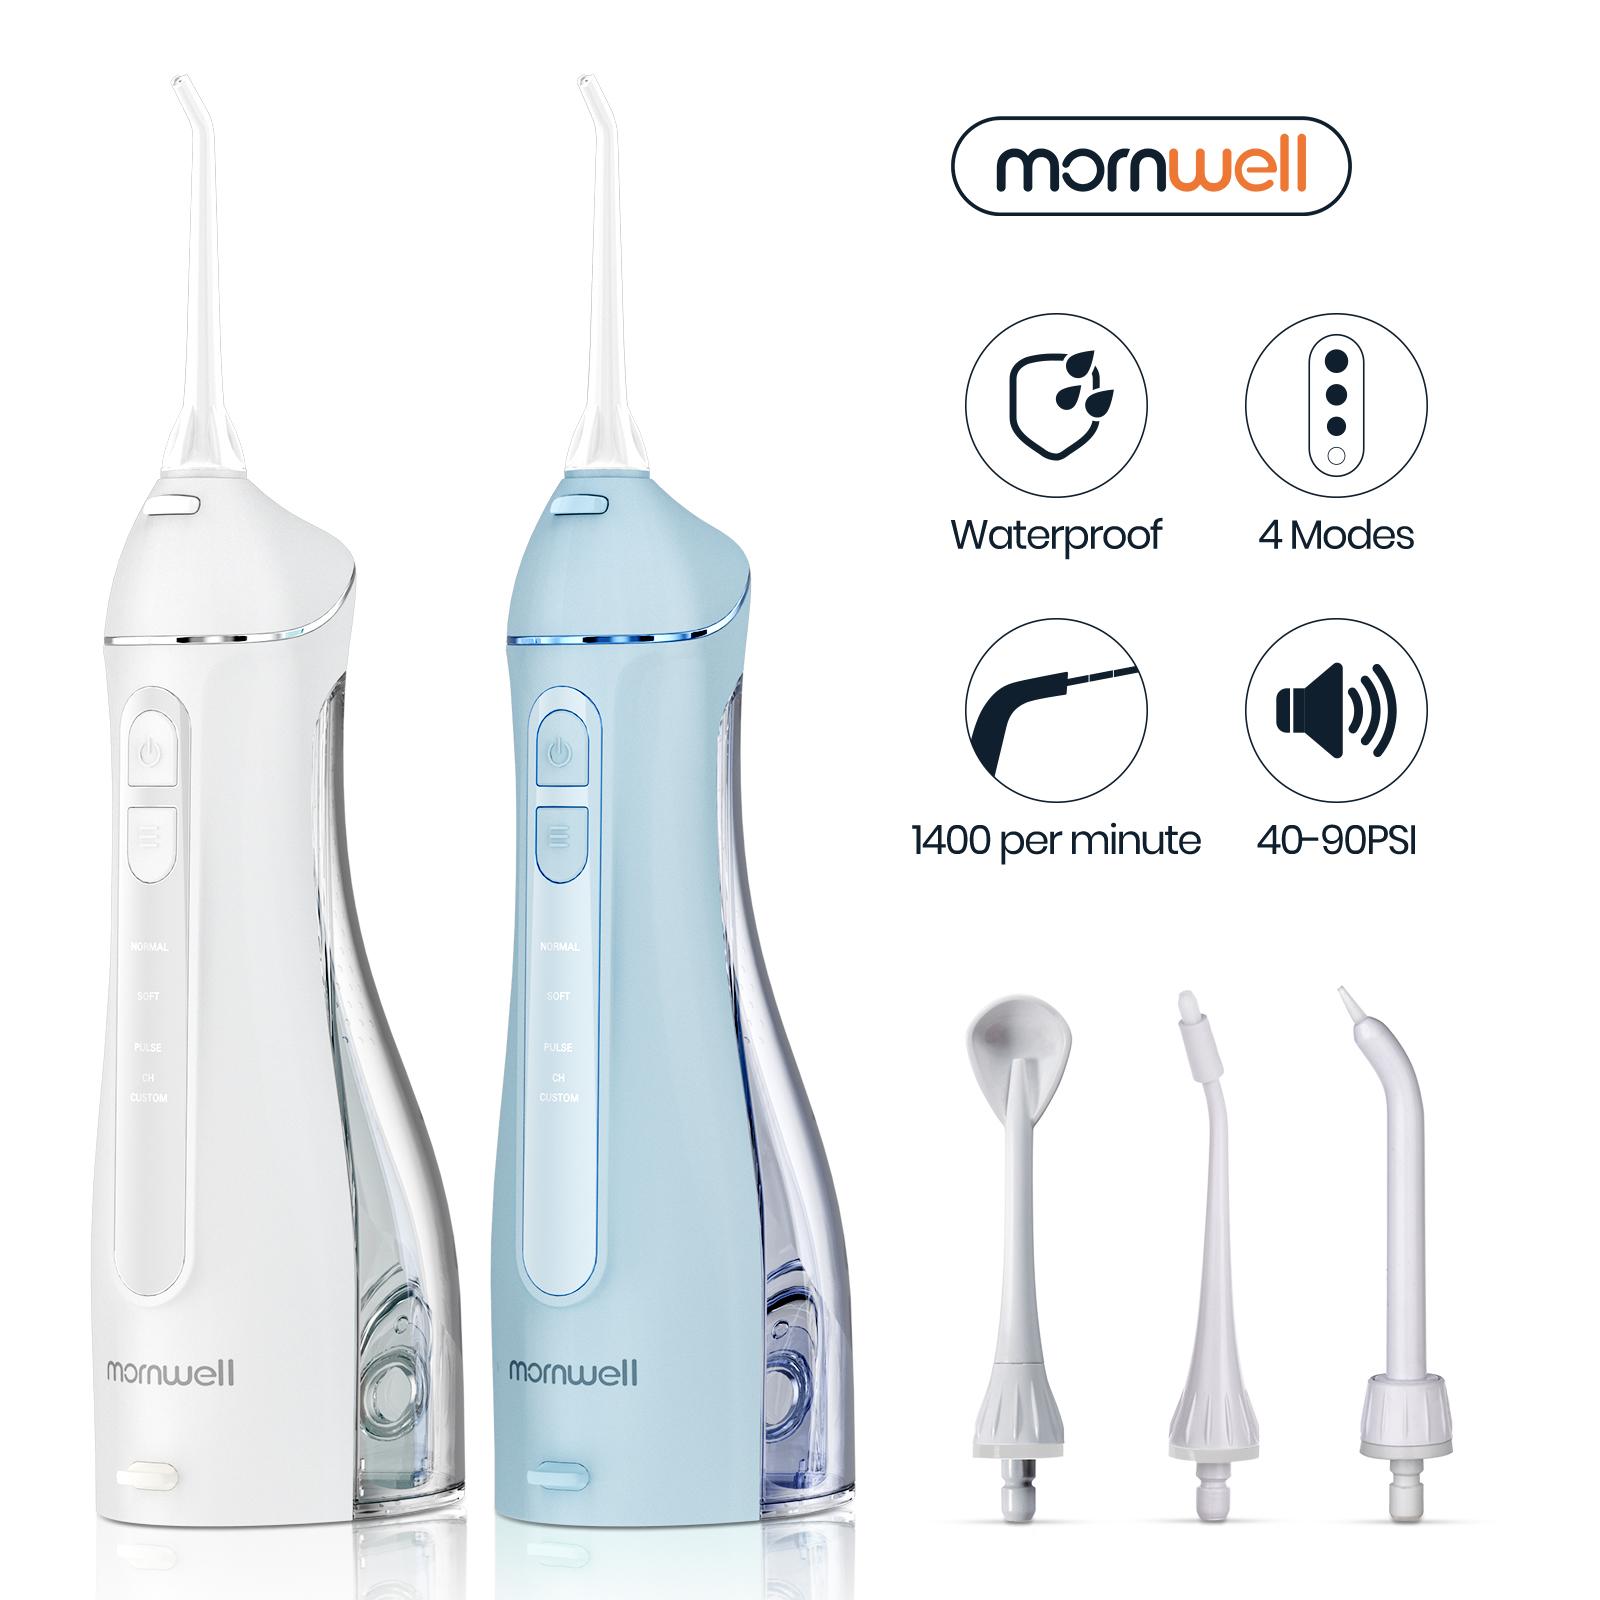 

Toothbrush Mornwell Water Flosser Oral Irrigator Portable Dental water jet 4 Modes water thread for Dental floss Teeth whitening Home hqd